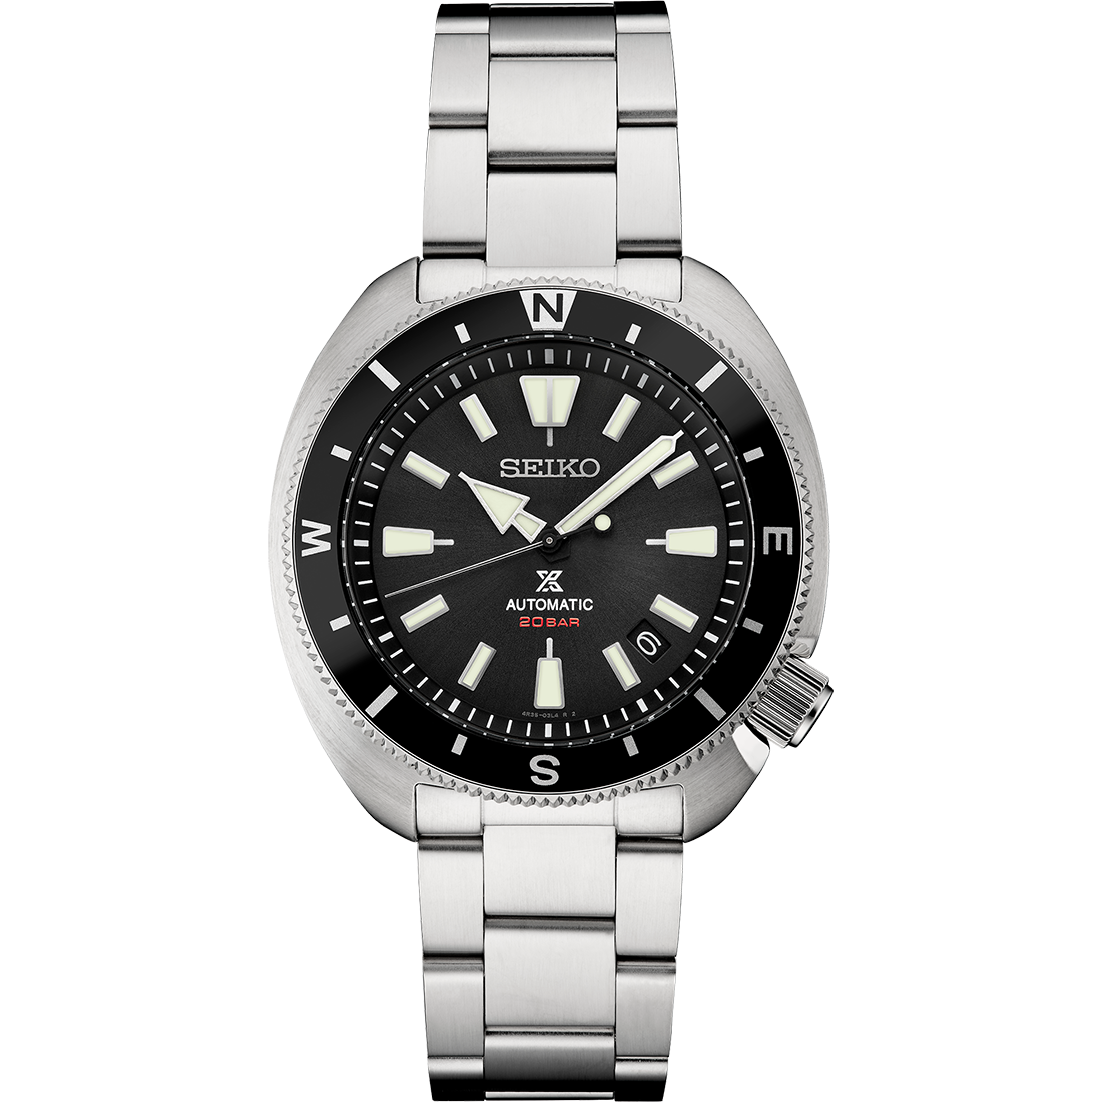 Gents Seiko Automatic Presage Black Stainless Steel